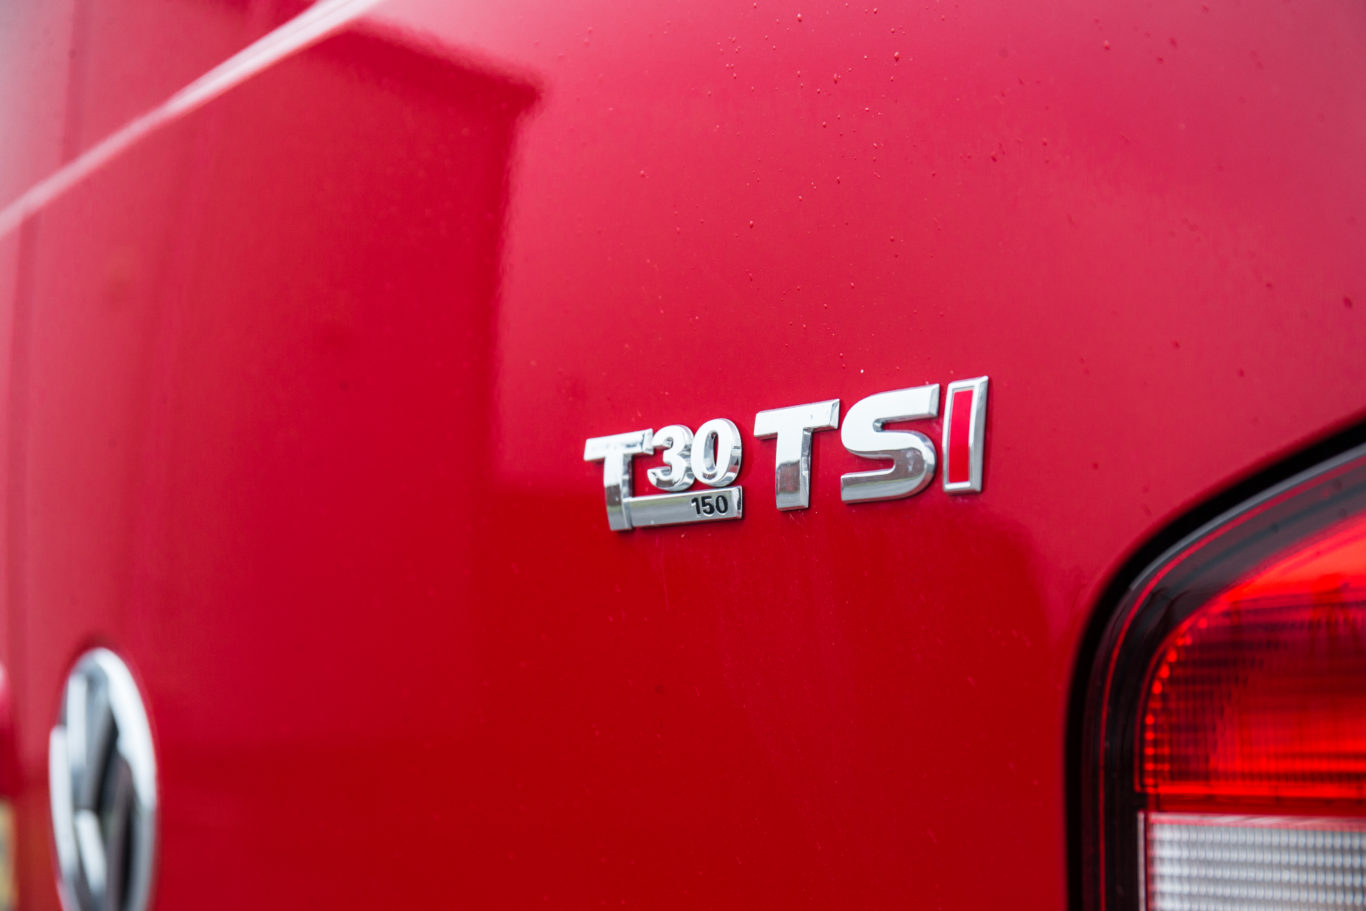 The Transporter is powered by a 2.0-litre petrol engine